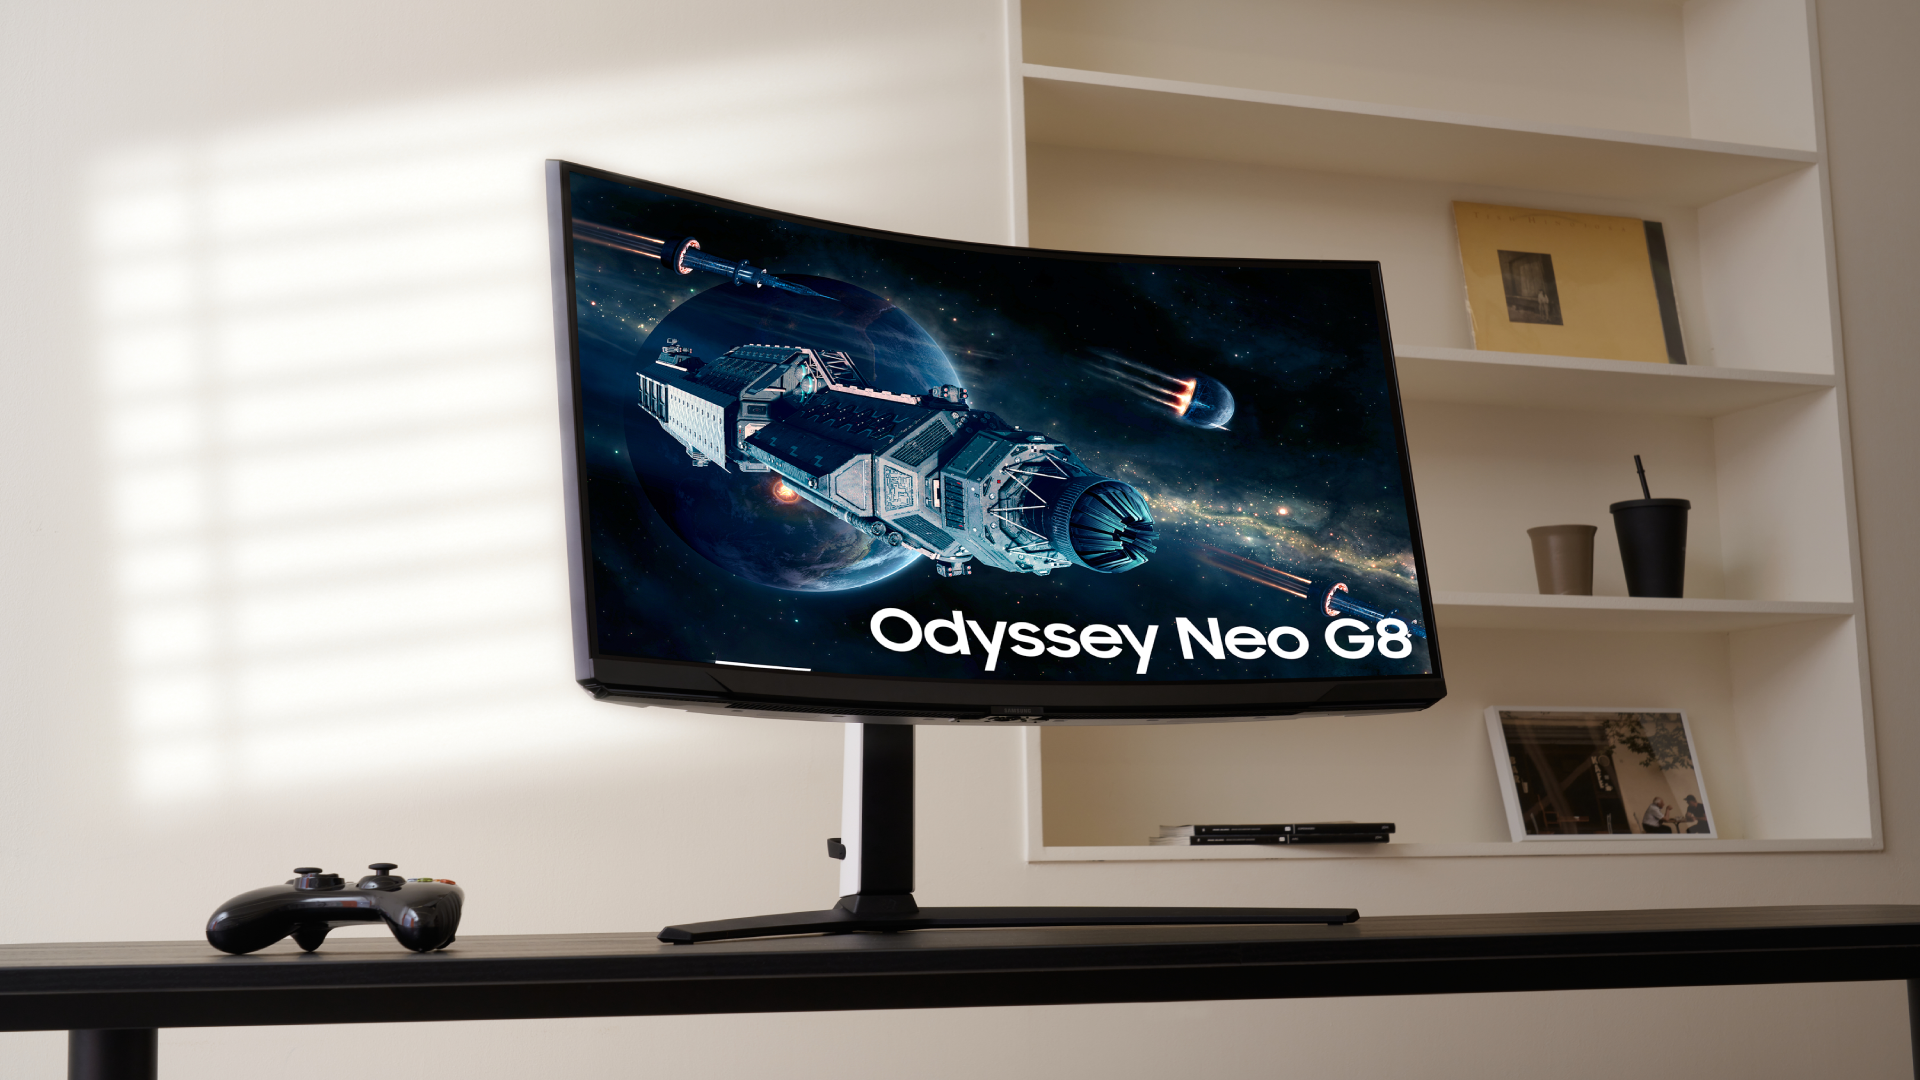 You can now own the "world’s first 240Hz 4K gaming monitor"...for a